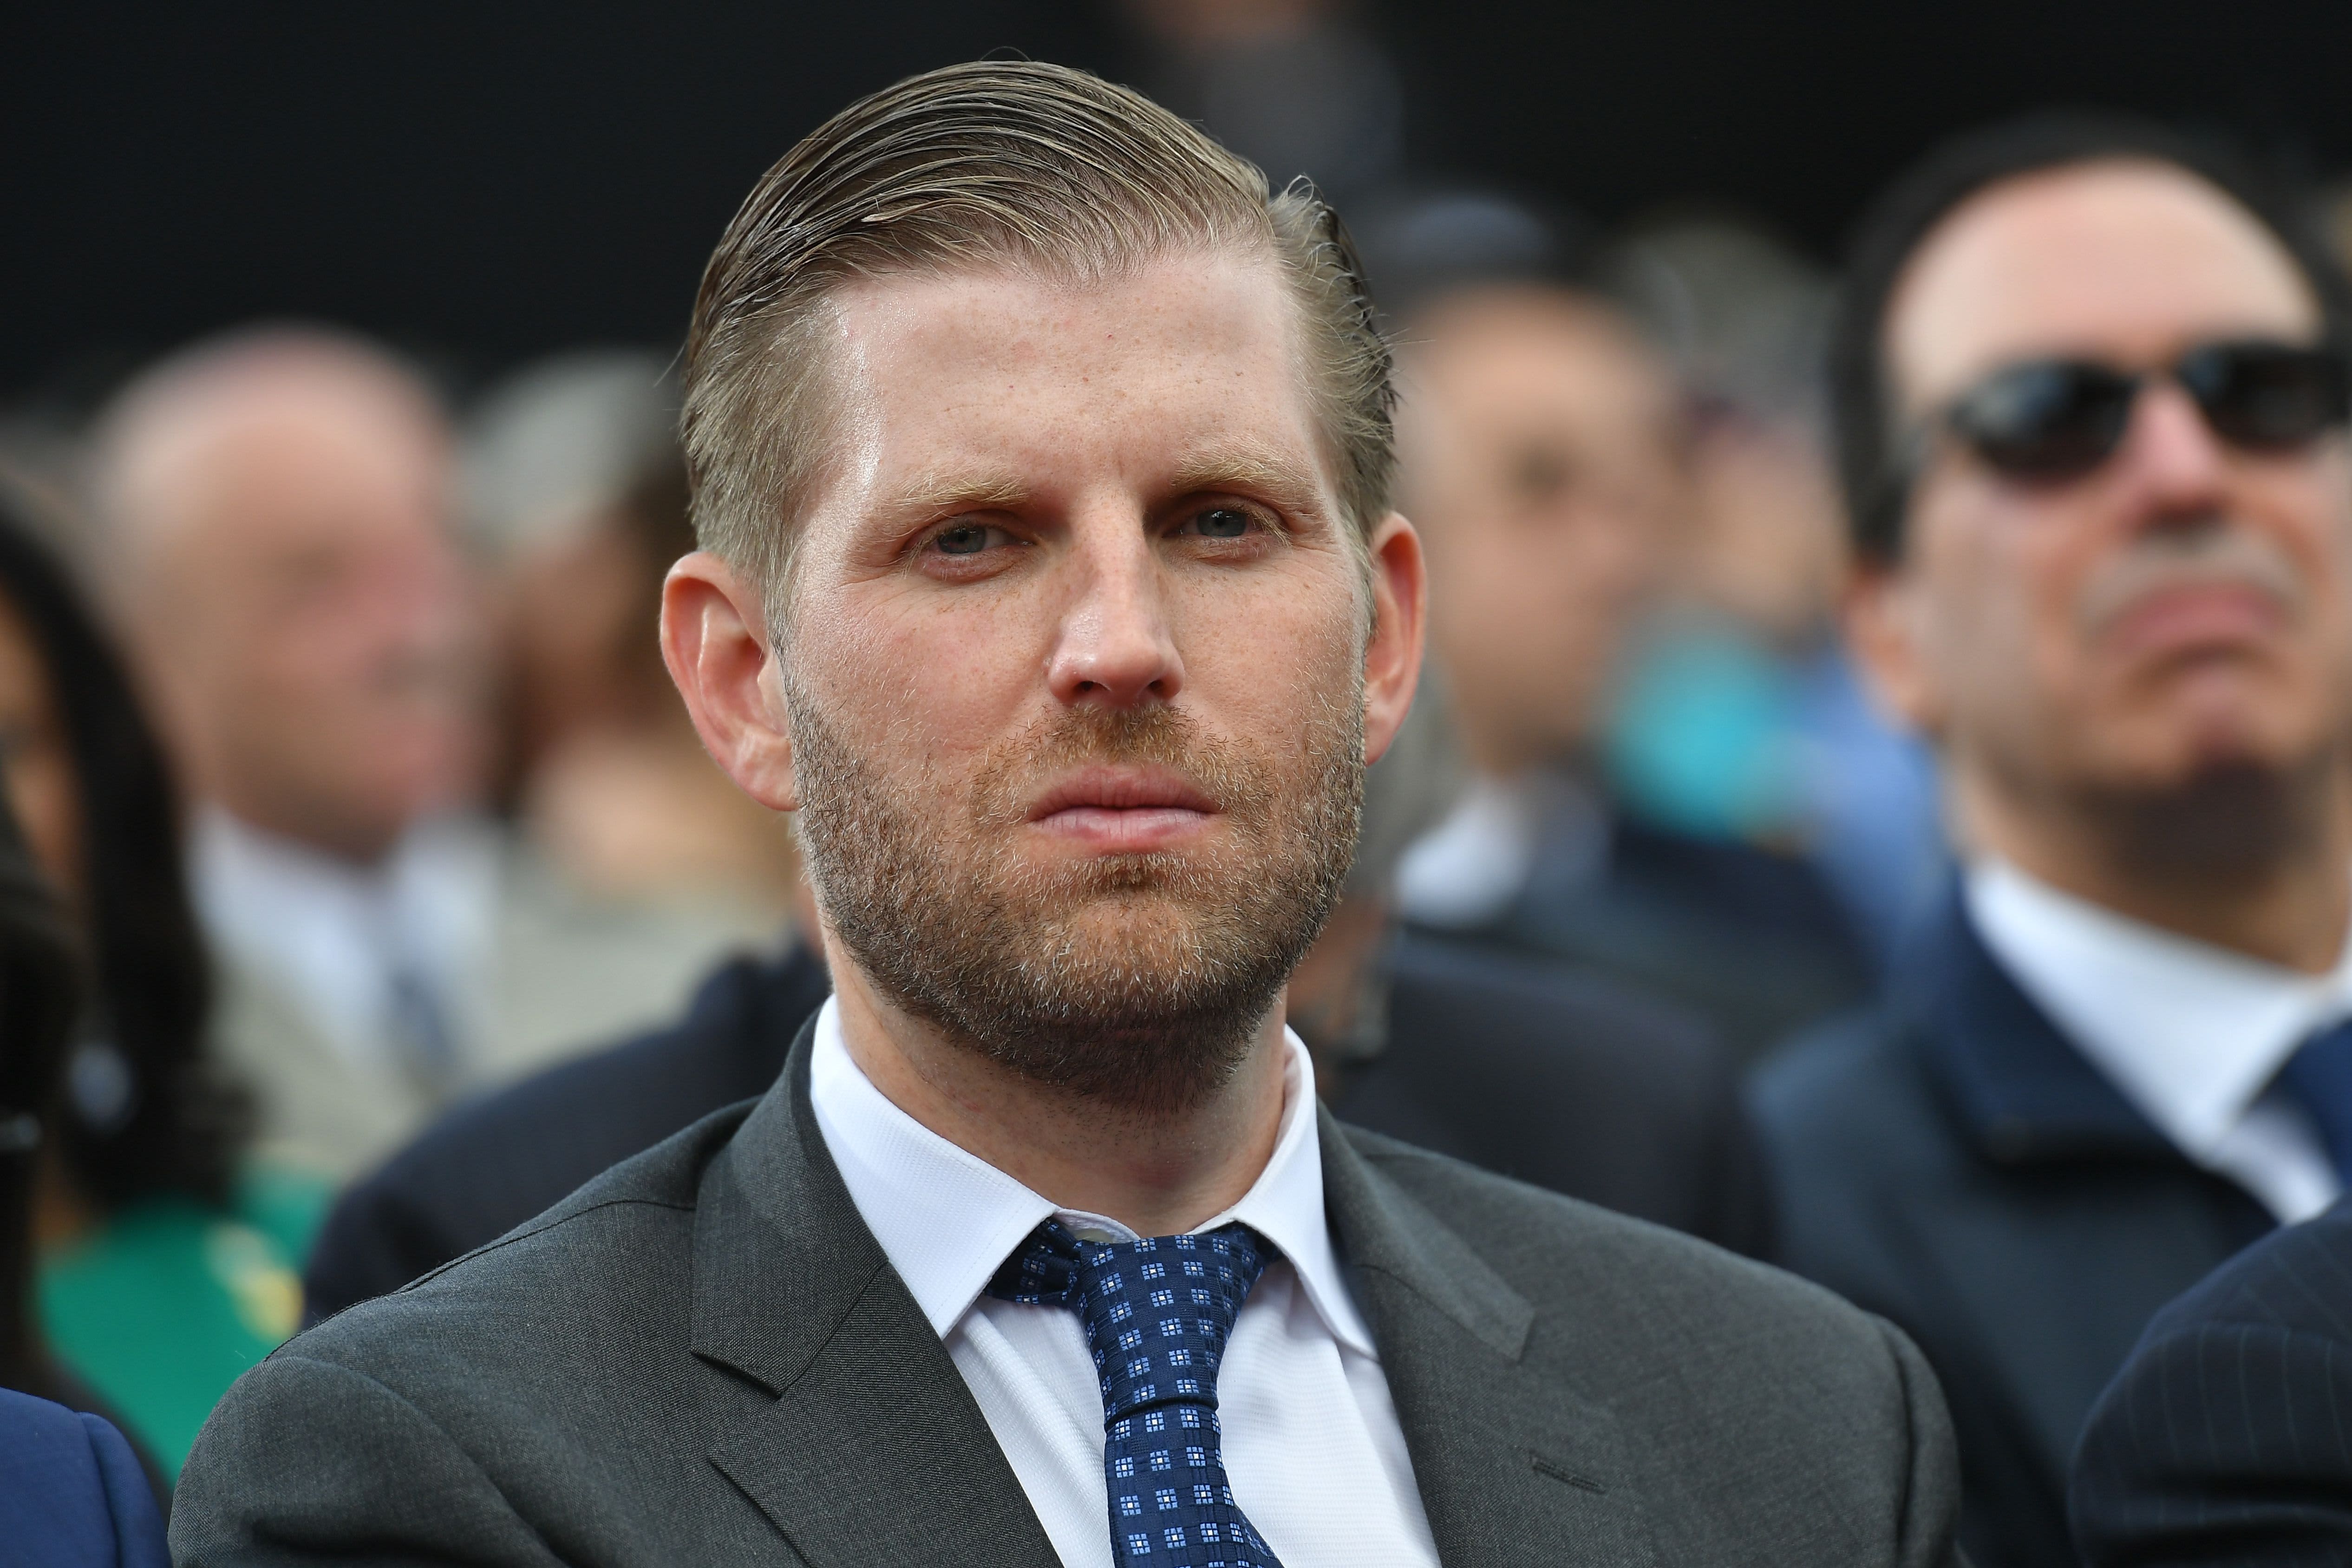 Eric Trump says he will comply with New York attorney general's subpoena, but only after the 2020 election